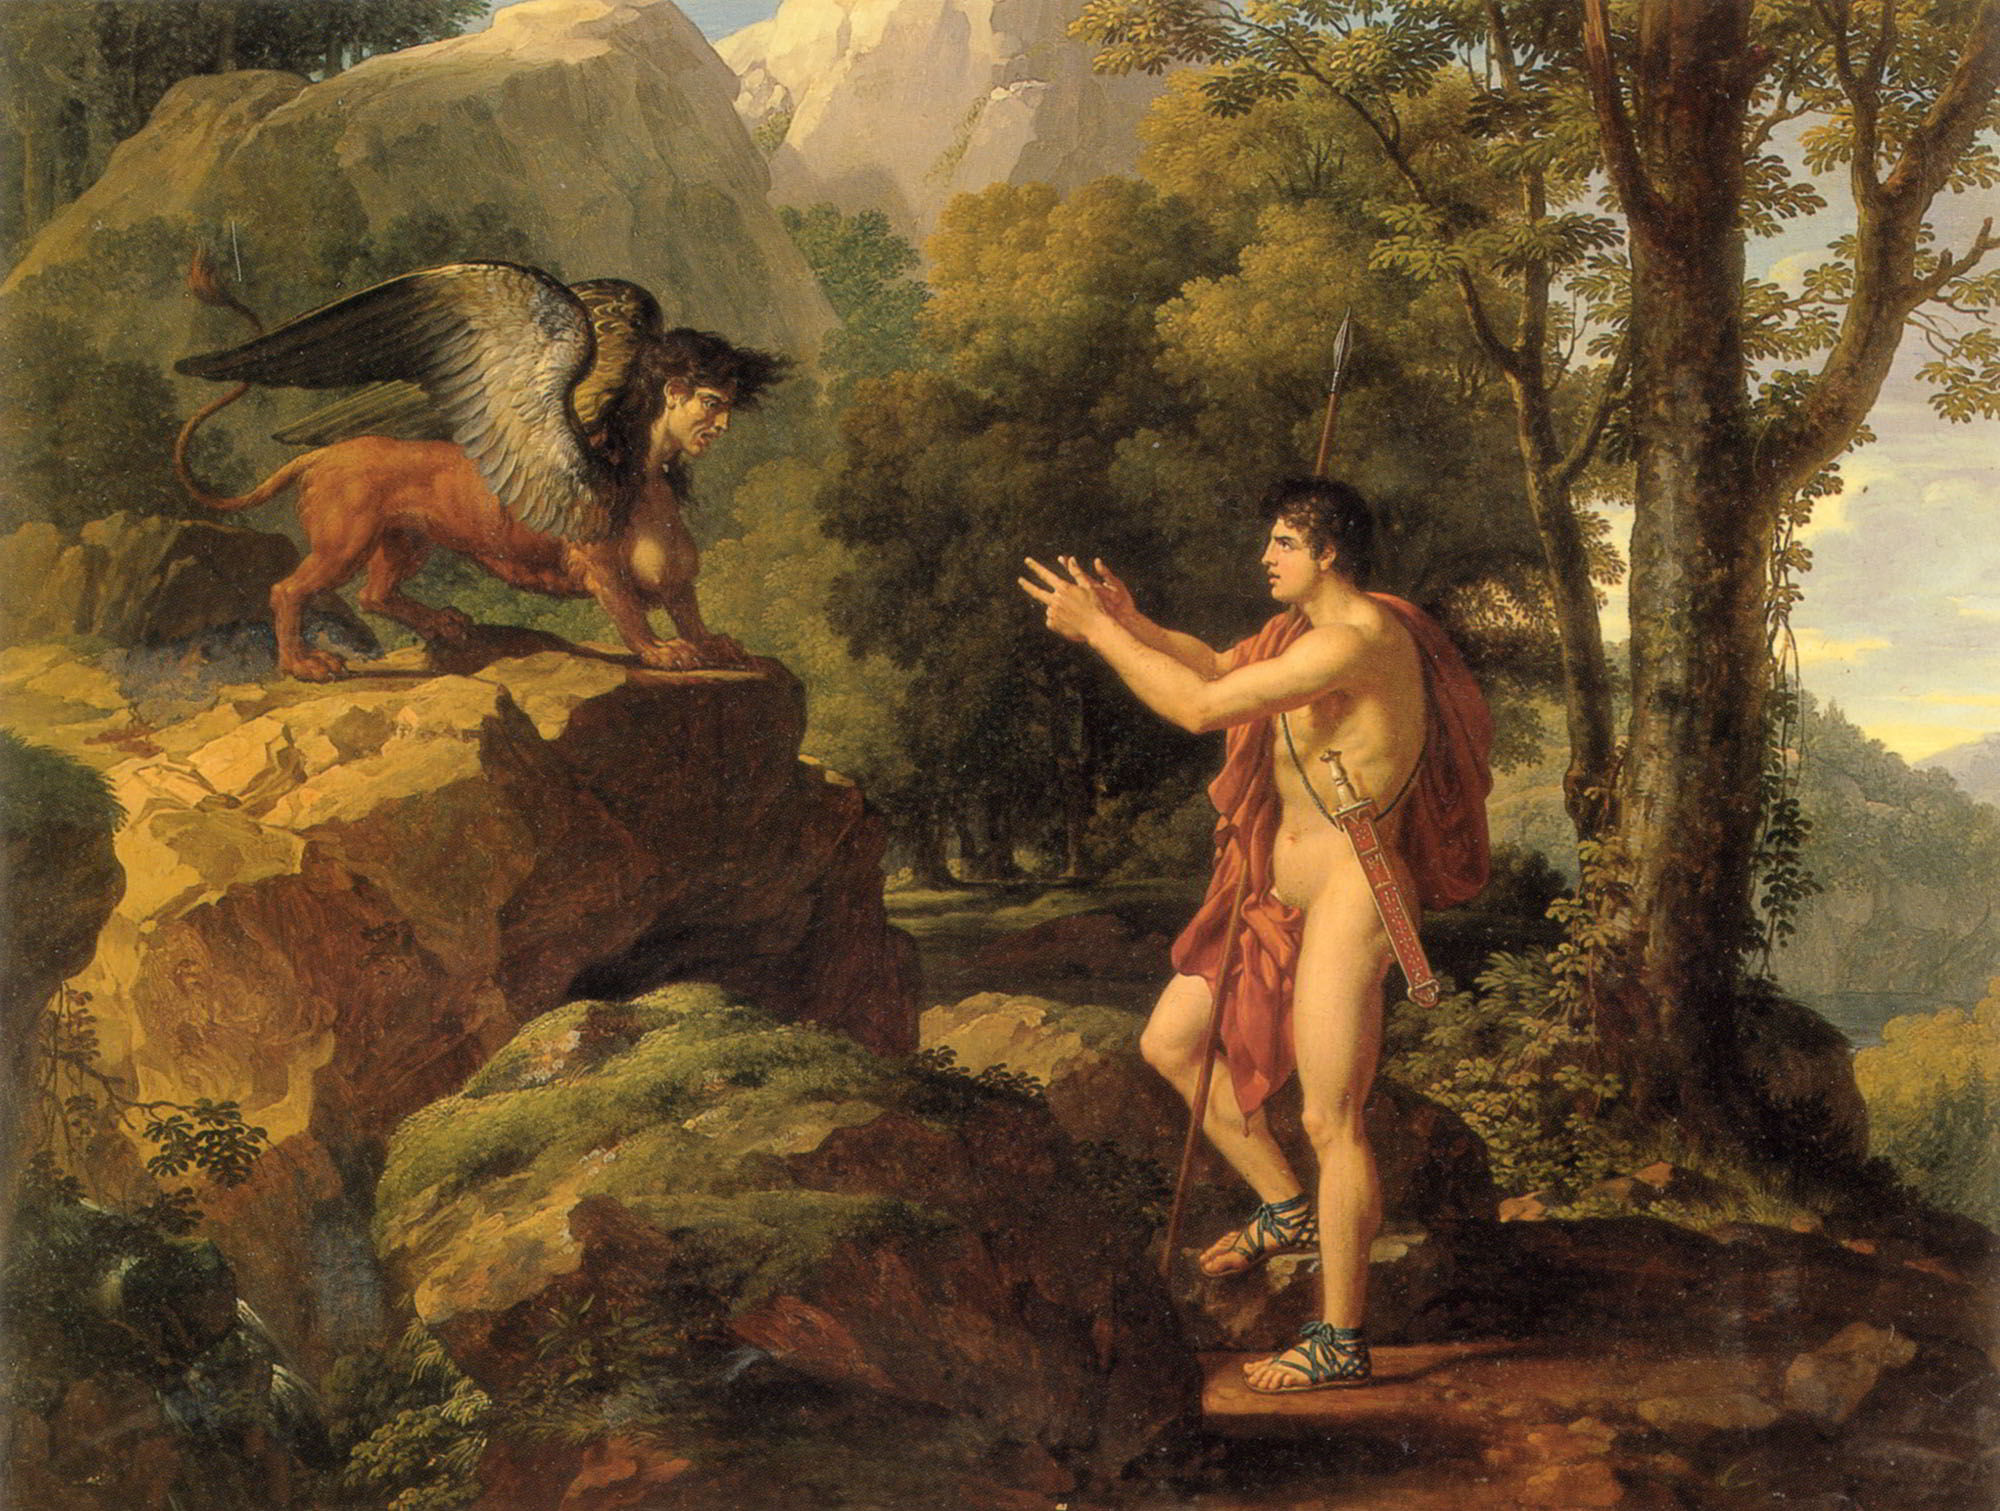 Oedipus and the Sphinx by Francois Xavier Fabre